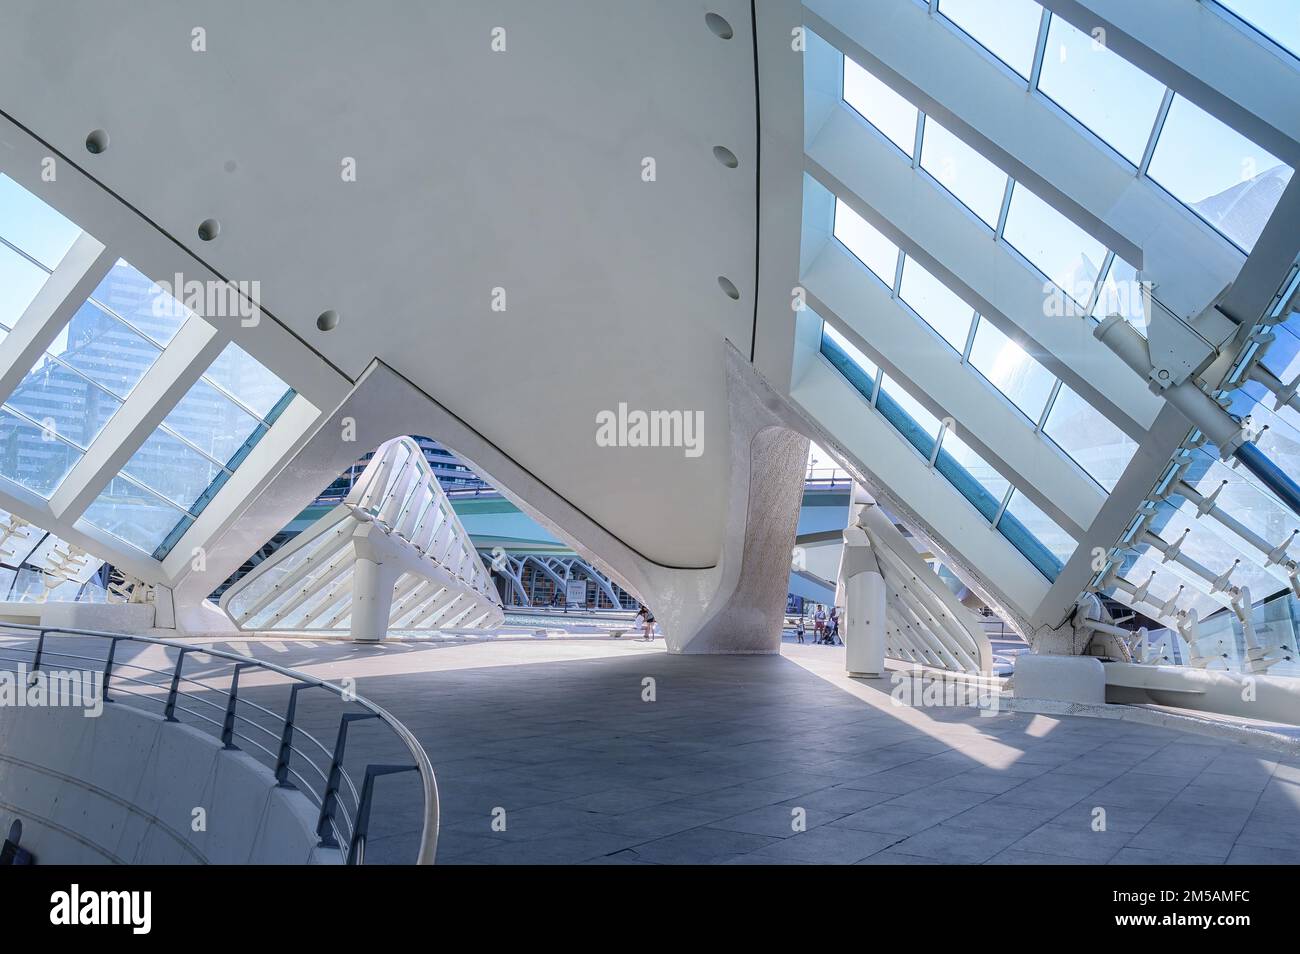 City of Arts and Sciences, abstract architecture in Valencia, Spain Stock Photo